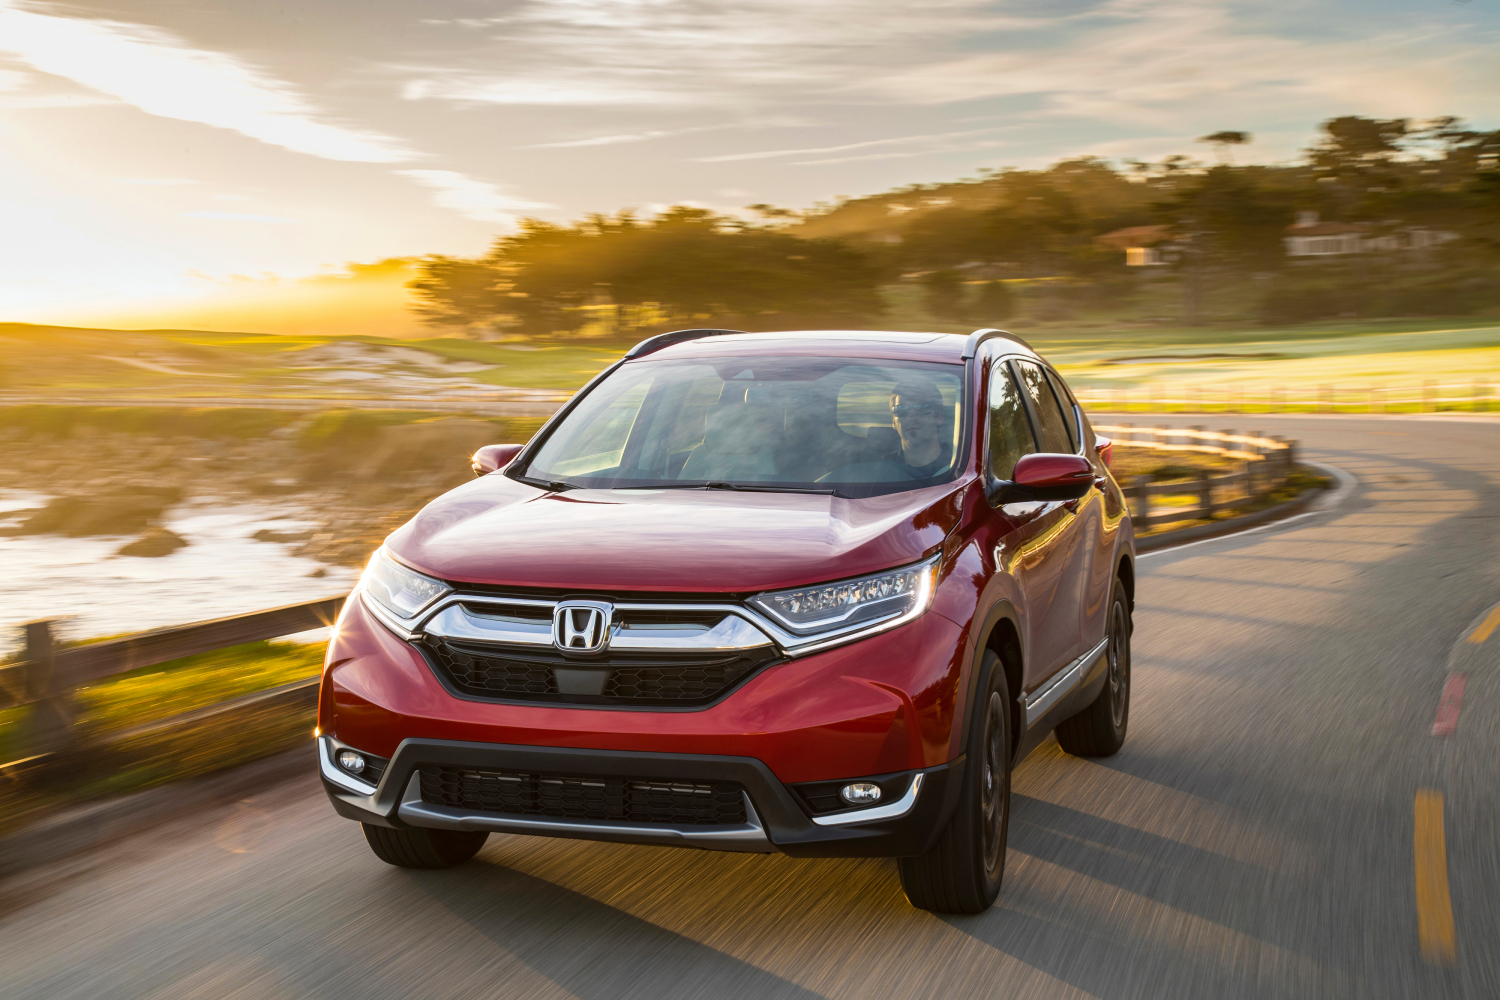 The best used SUV deals in August 2022 include the certified pre-owned Honda CR-V